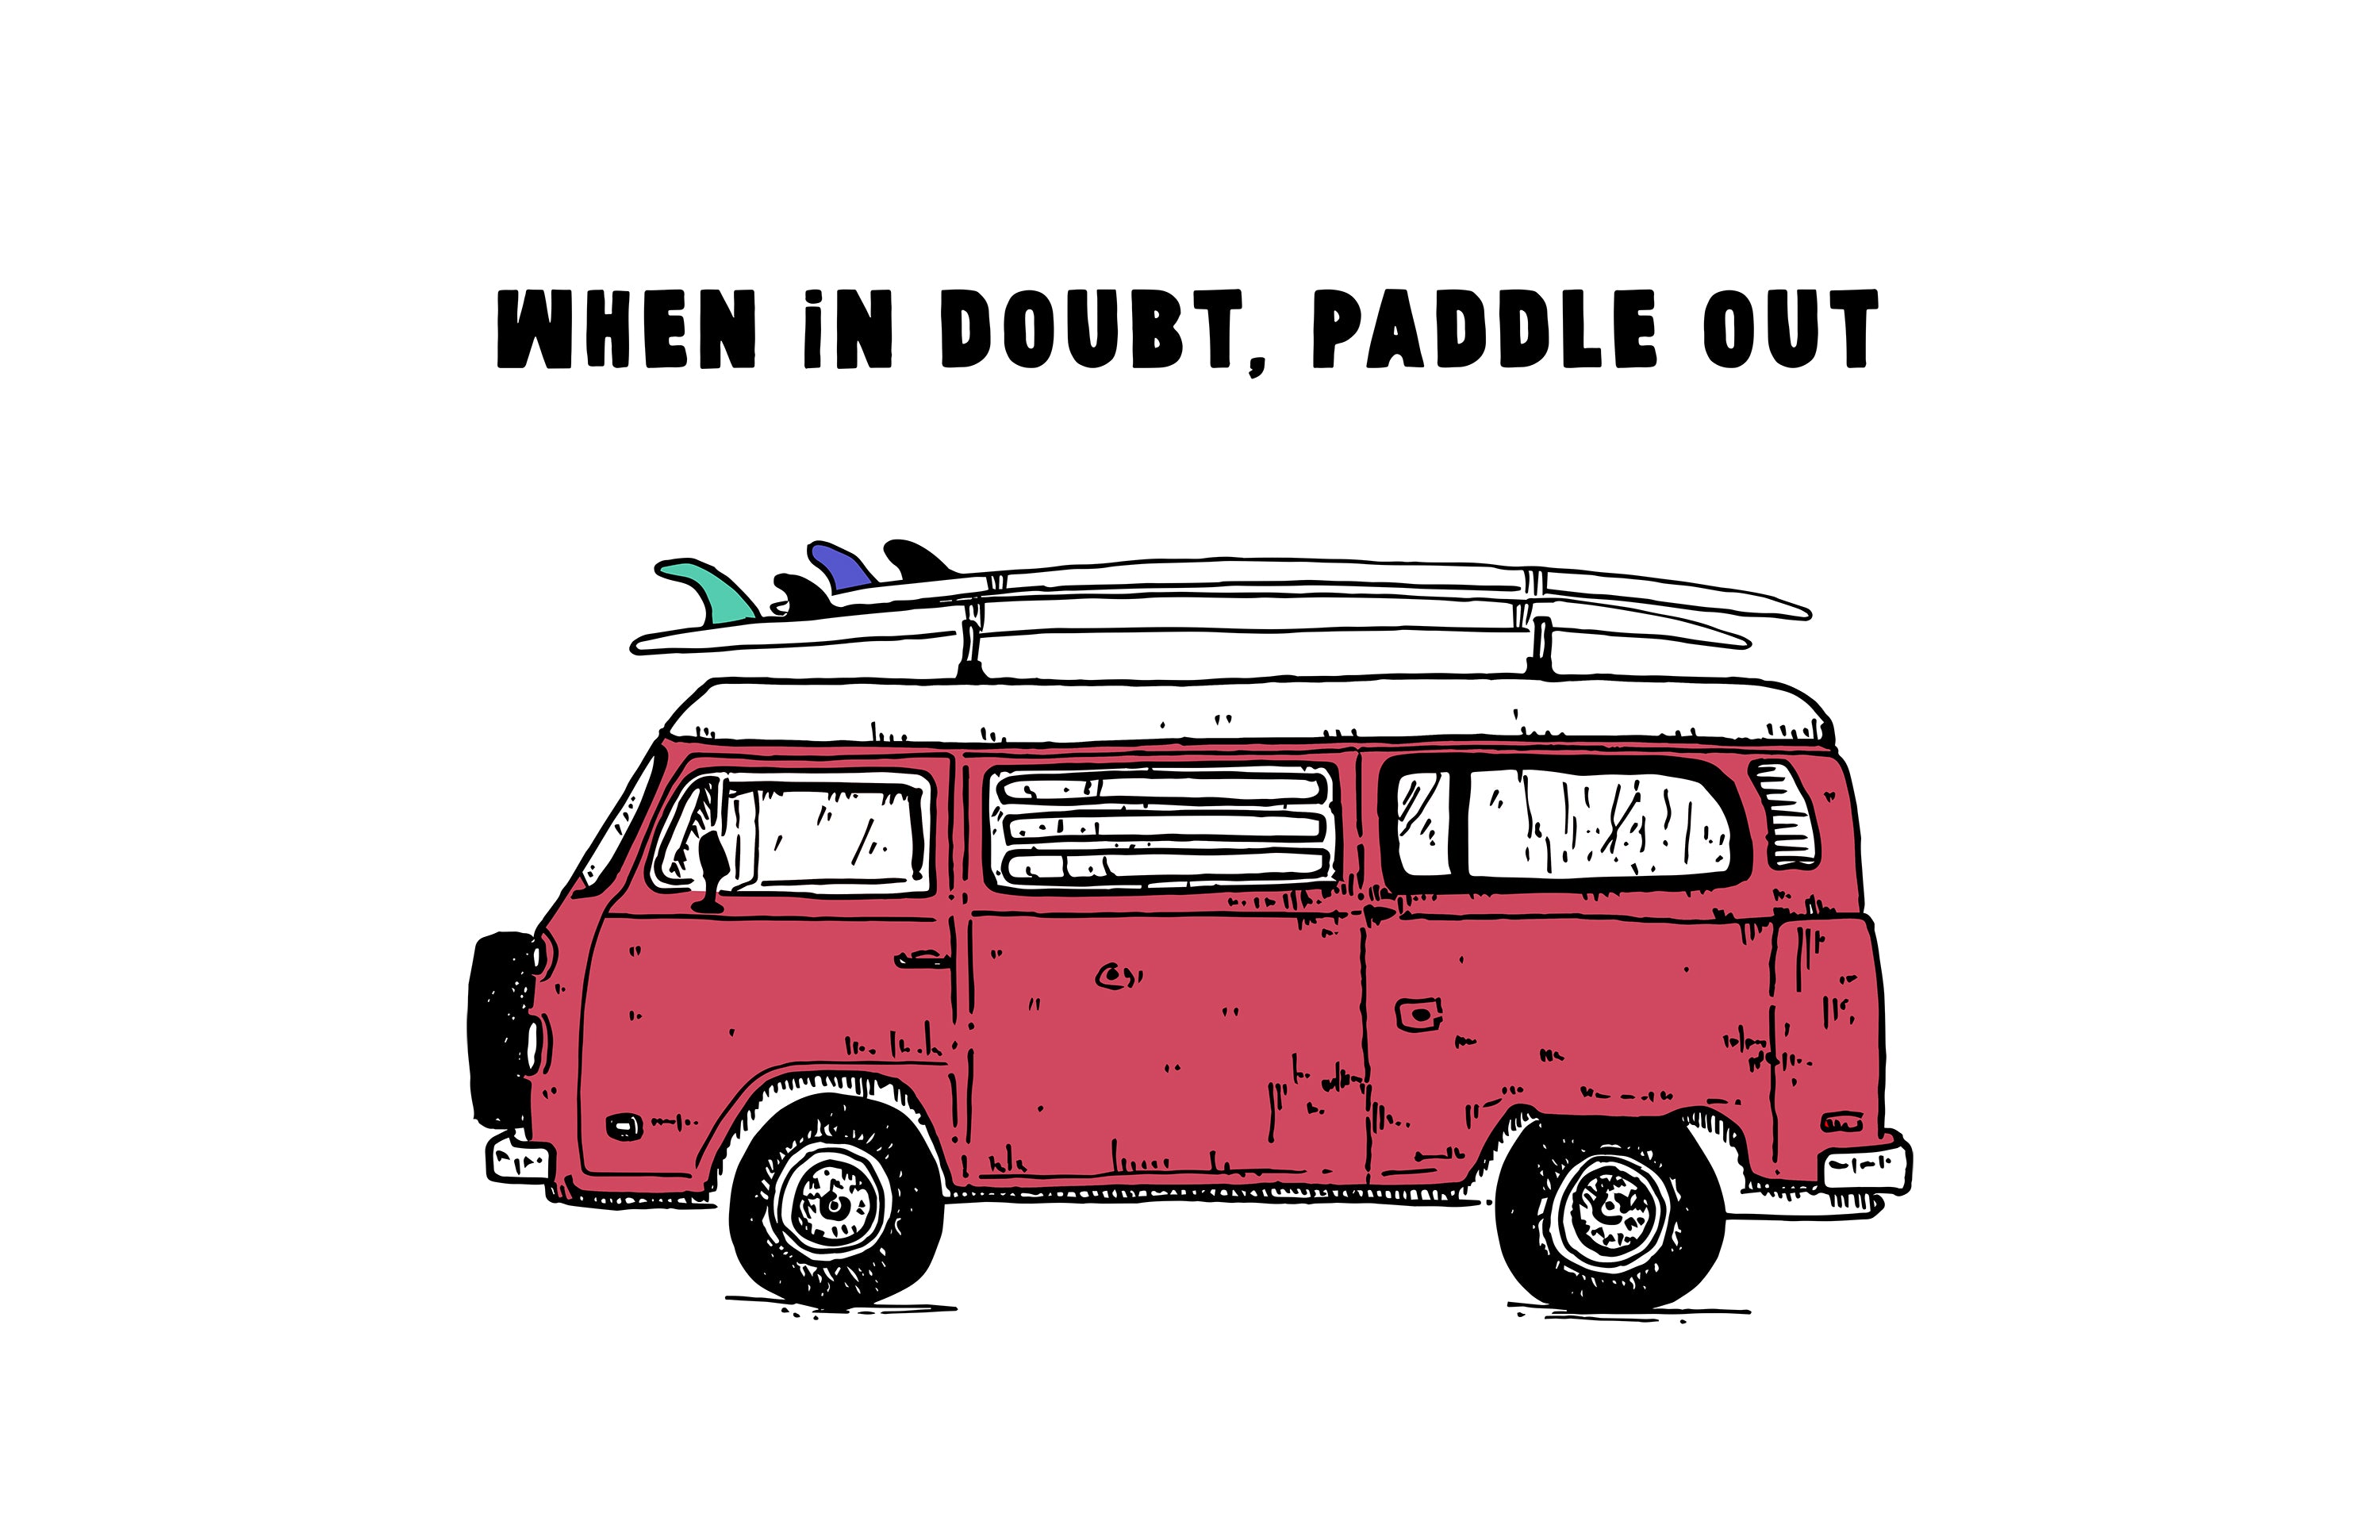 WHEN IN DOUBT, PADDLE OUT